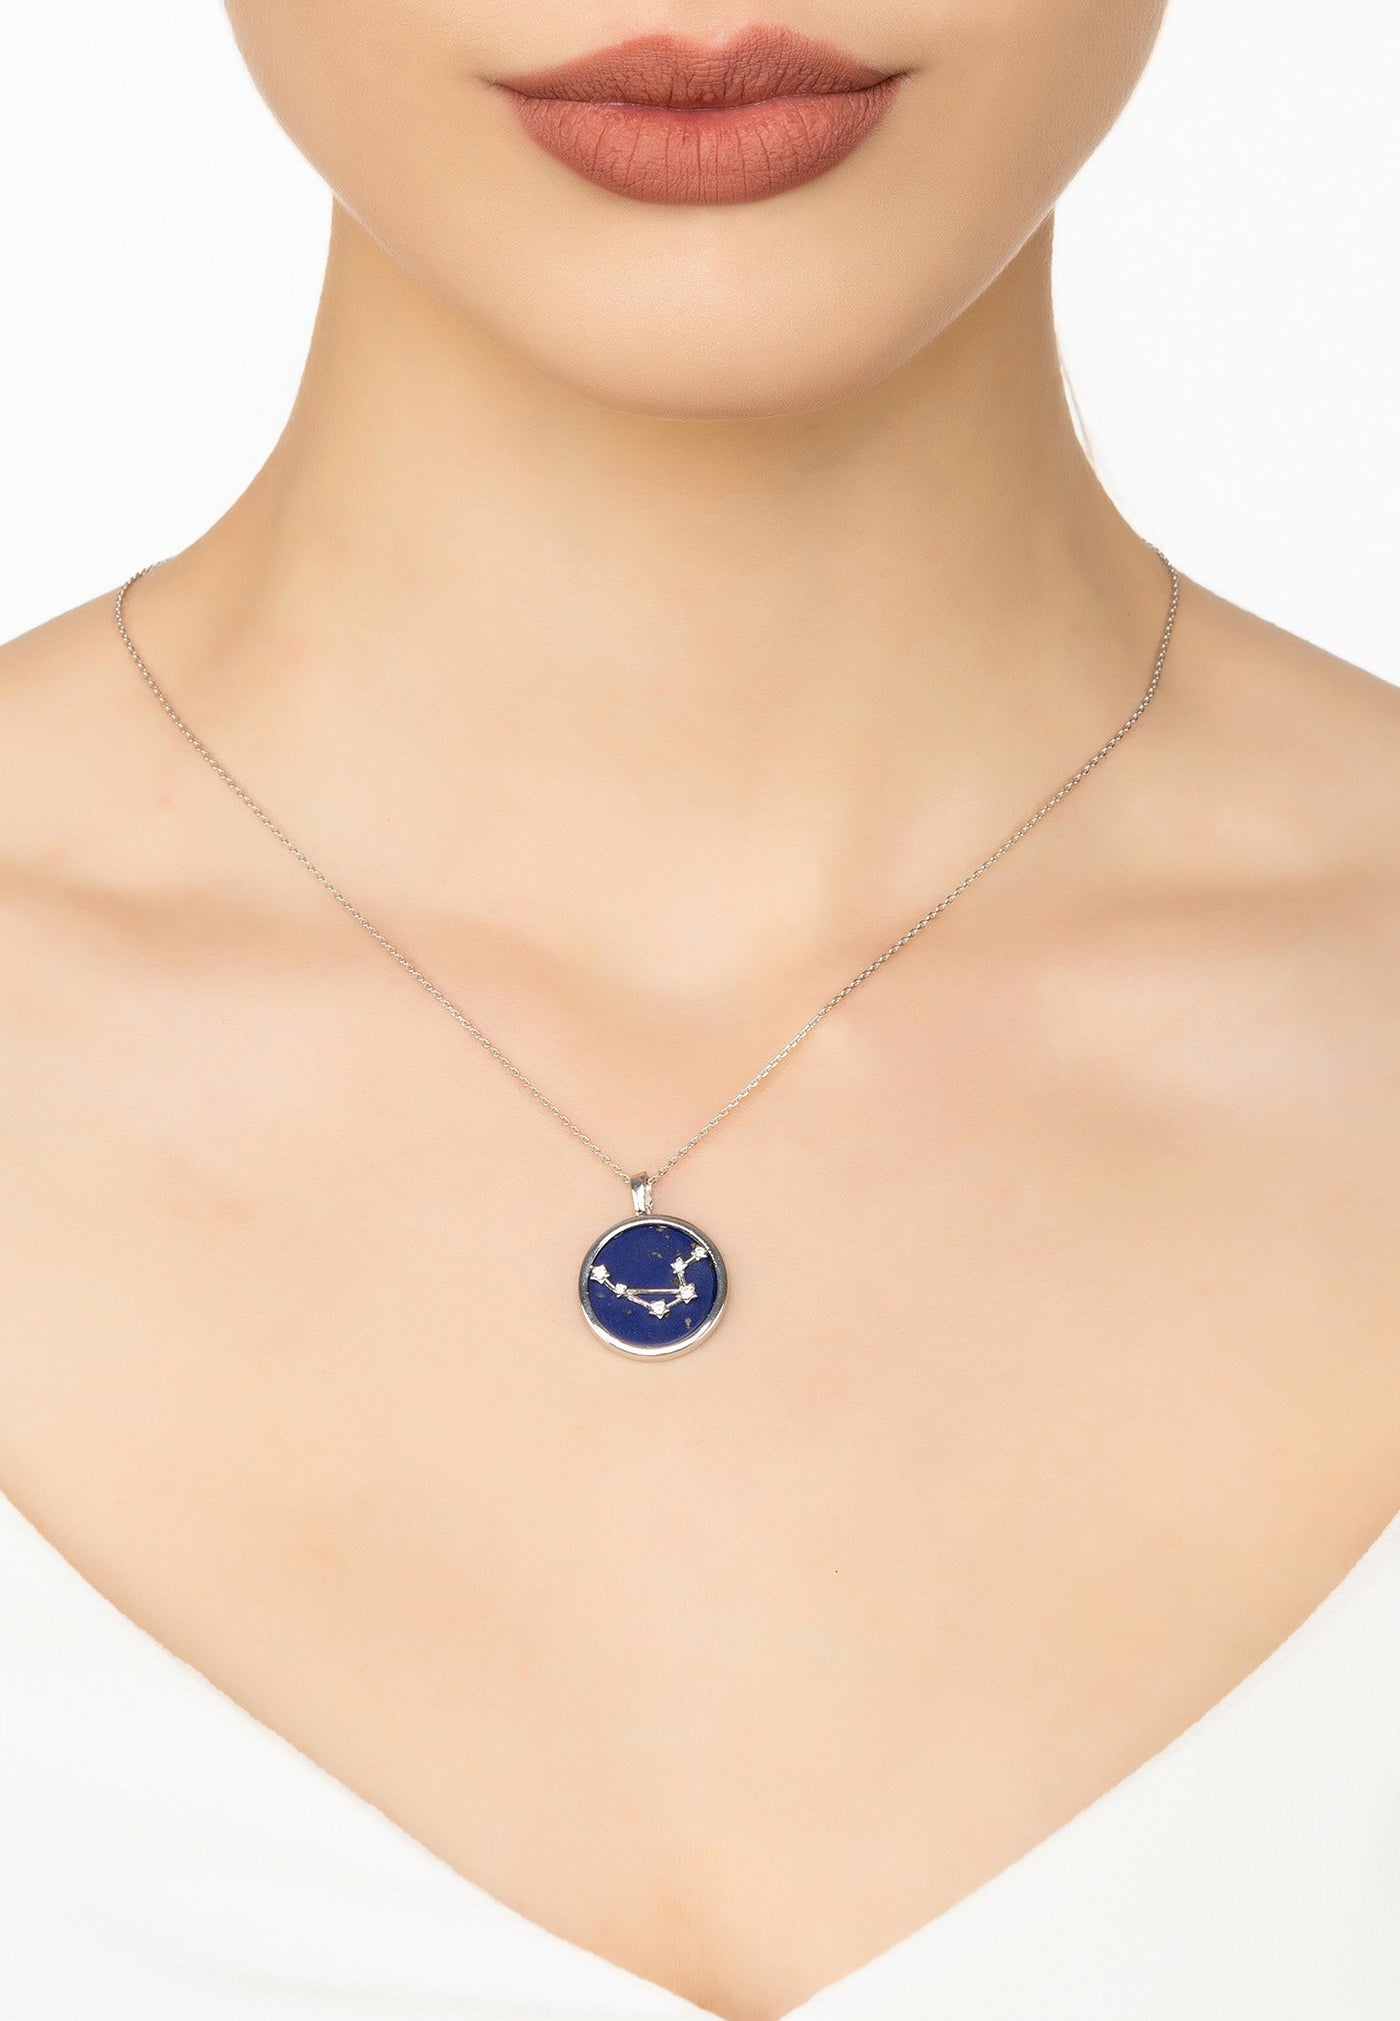 Libra - necklace - 925 sterling silver - lapis lazuli with white zirconia